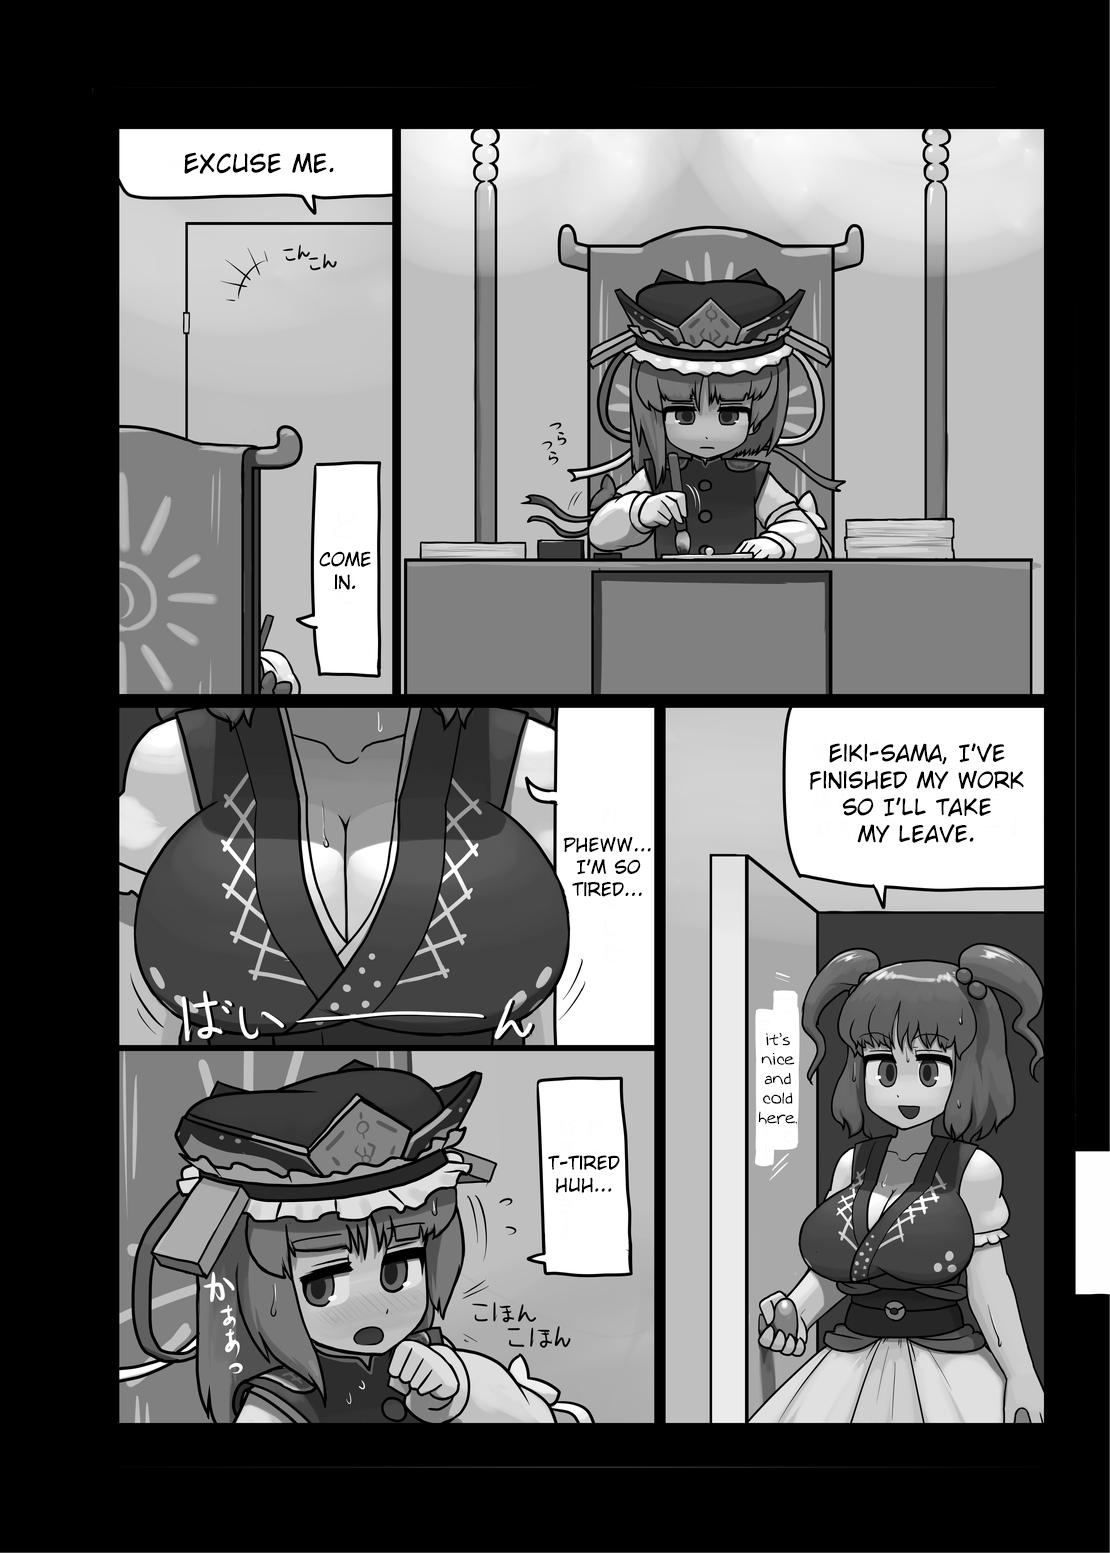 Famosa The Black and White in Me - Touhou project Negro - Page 3